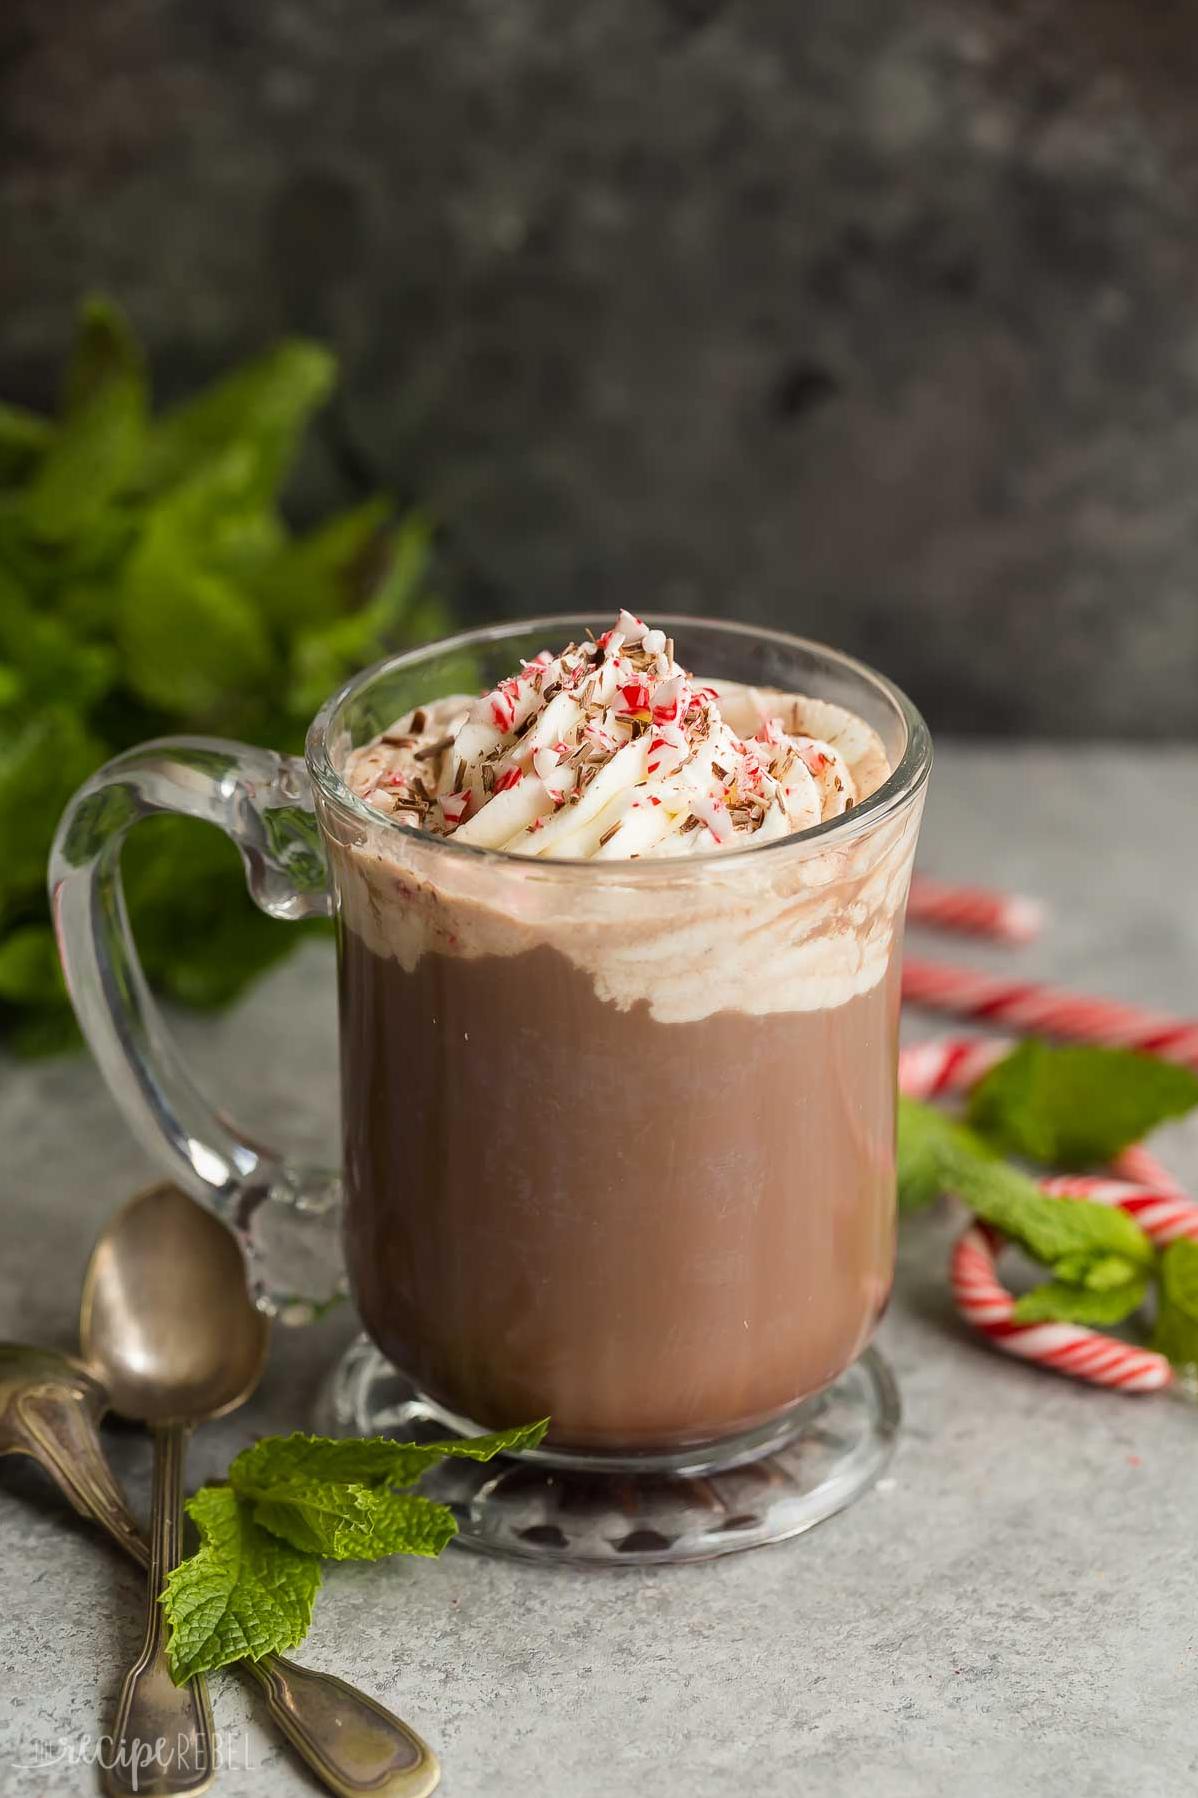  Turn your kitchen into a coffee shop with this Peppermint Mocha Mix recipe. 🏠☕